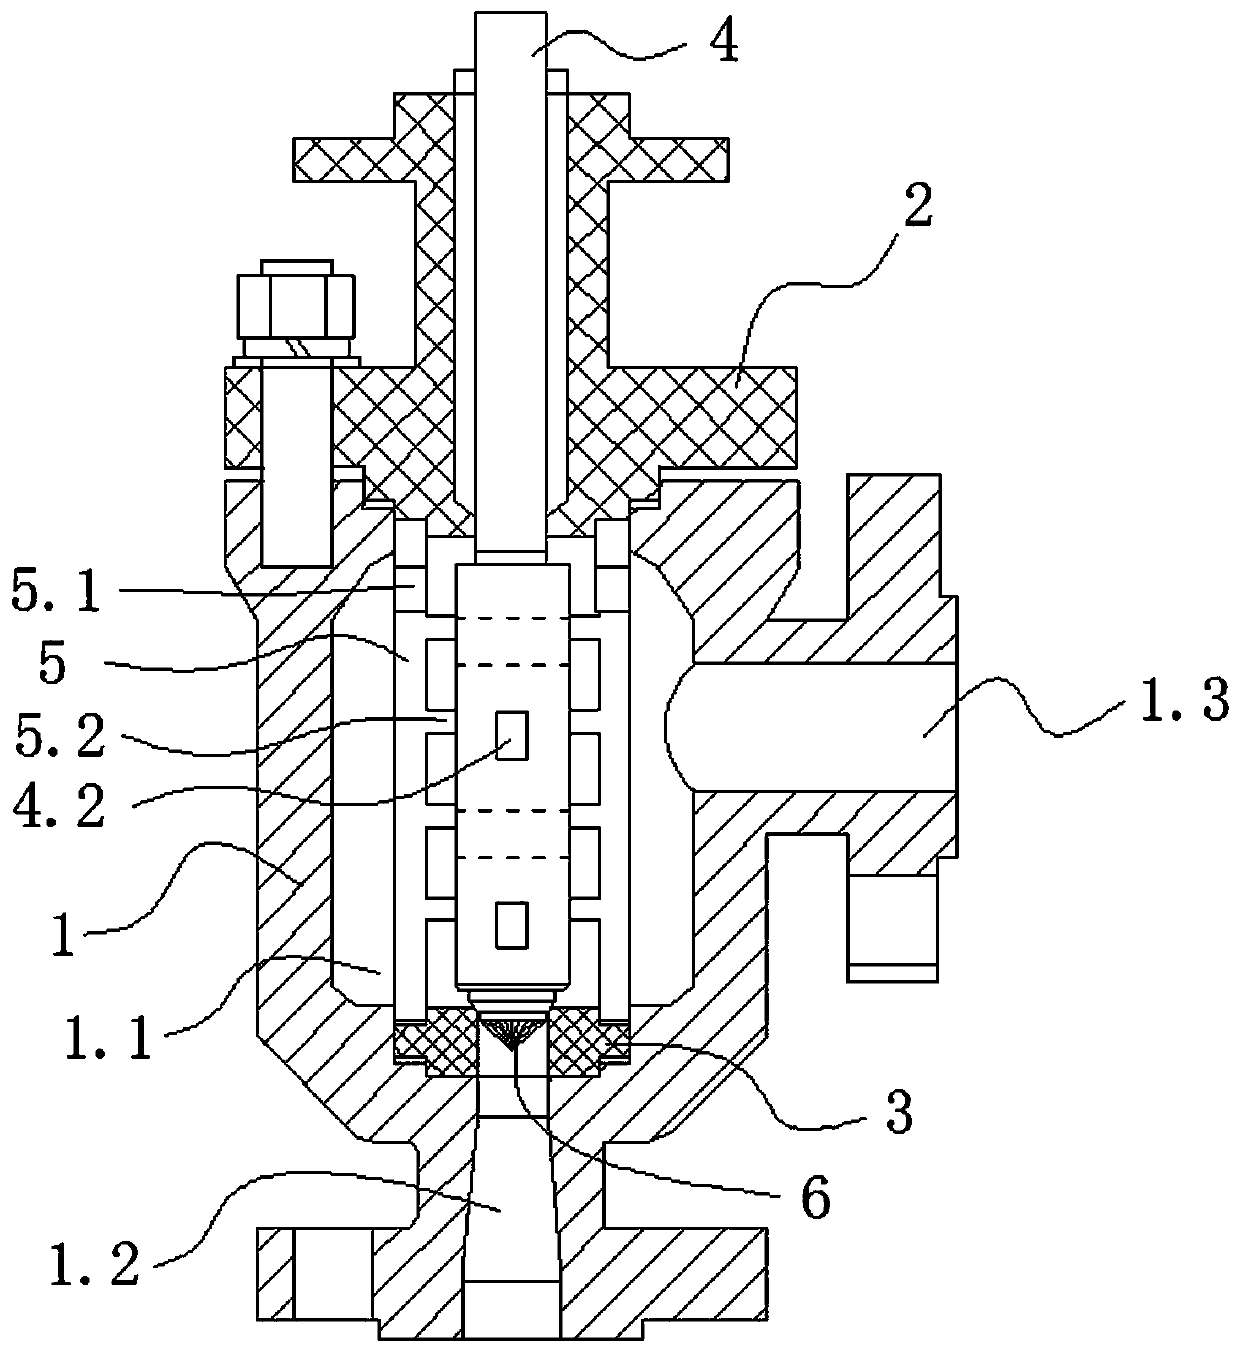 Cutting type series-connection multi-stage pressure-reduction regulating valve